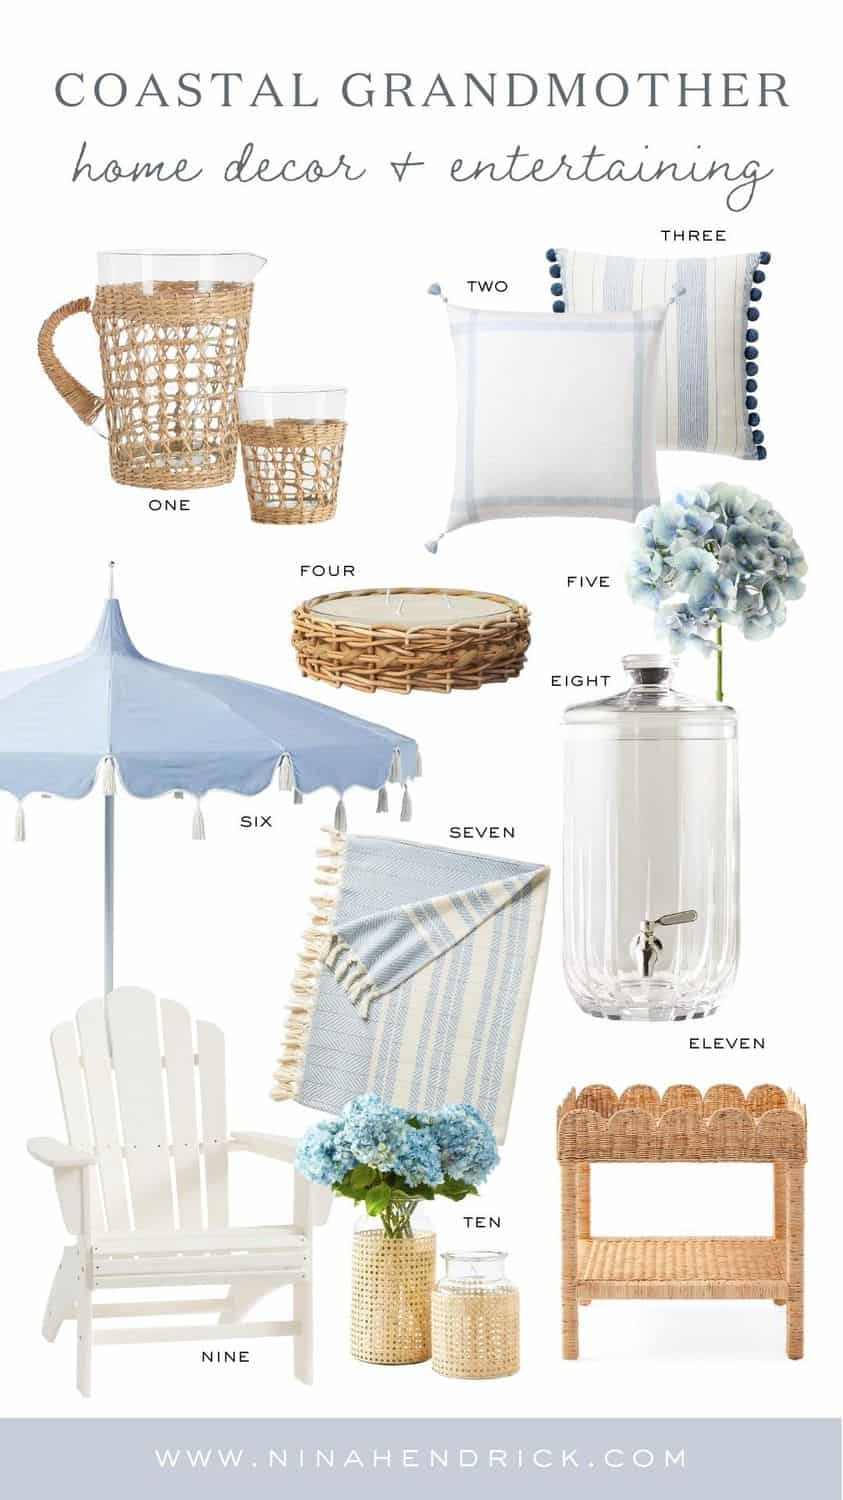 Round up of product images showing Coastal Grandmother style home decor and entertaining pieces like hydrangeas and rattan pieces